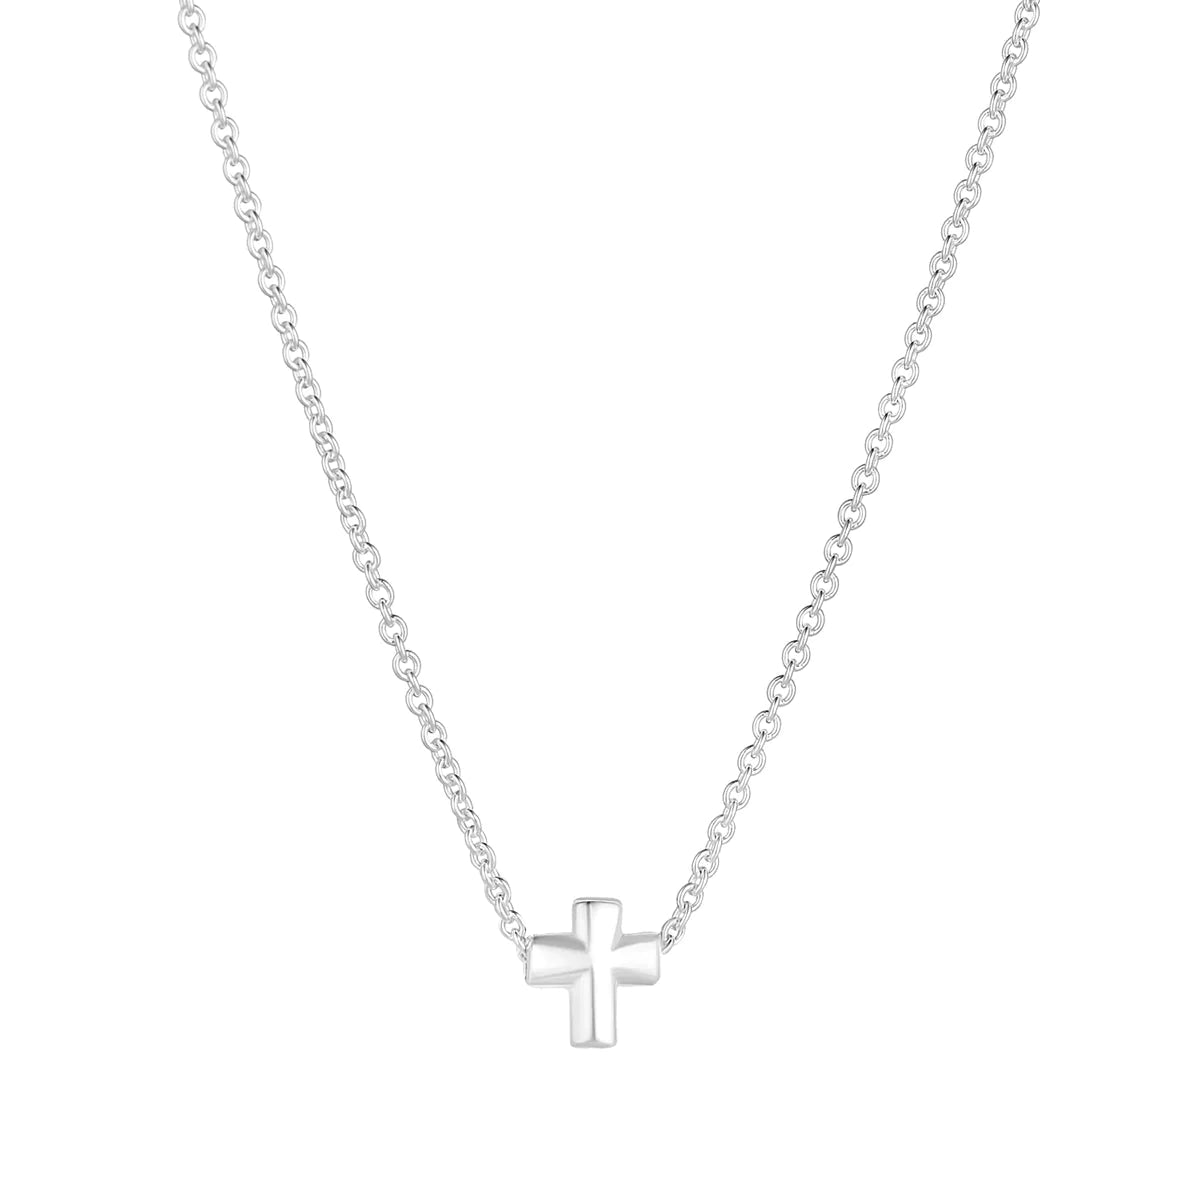 STERLING SILVER SMALL CROSS NECKLET